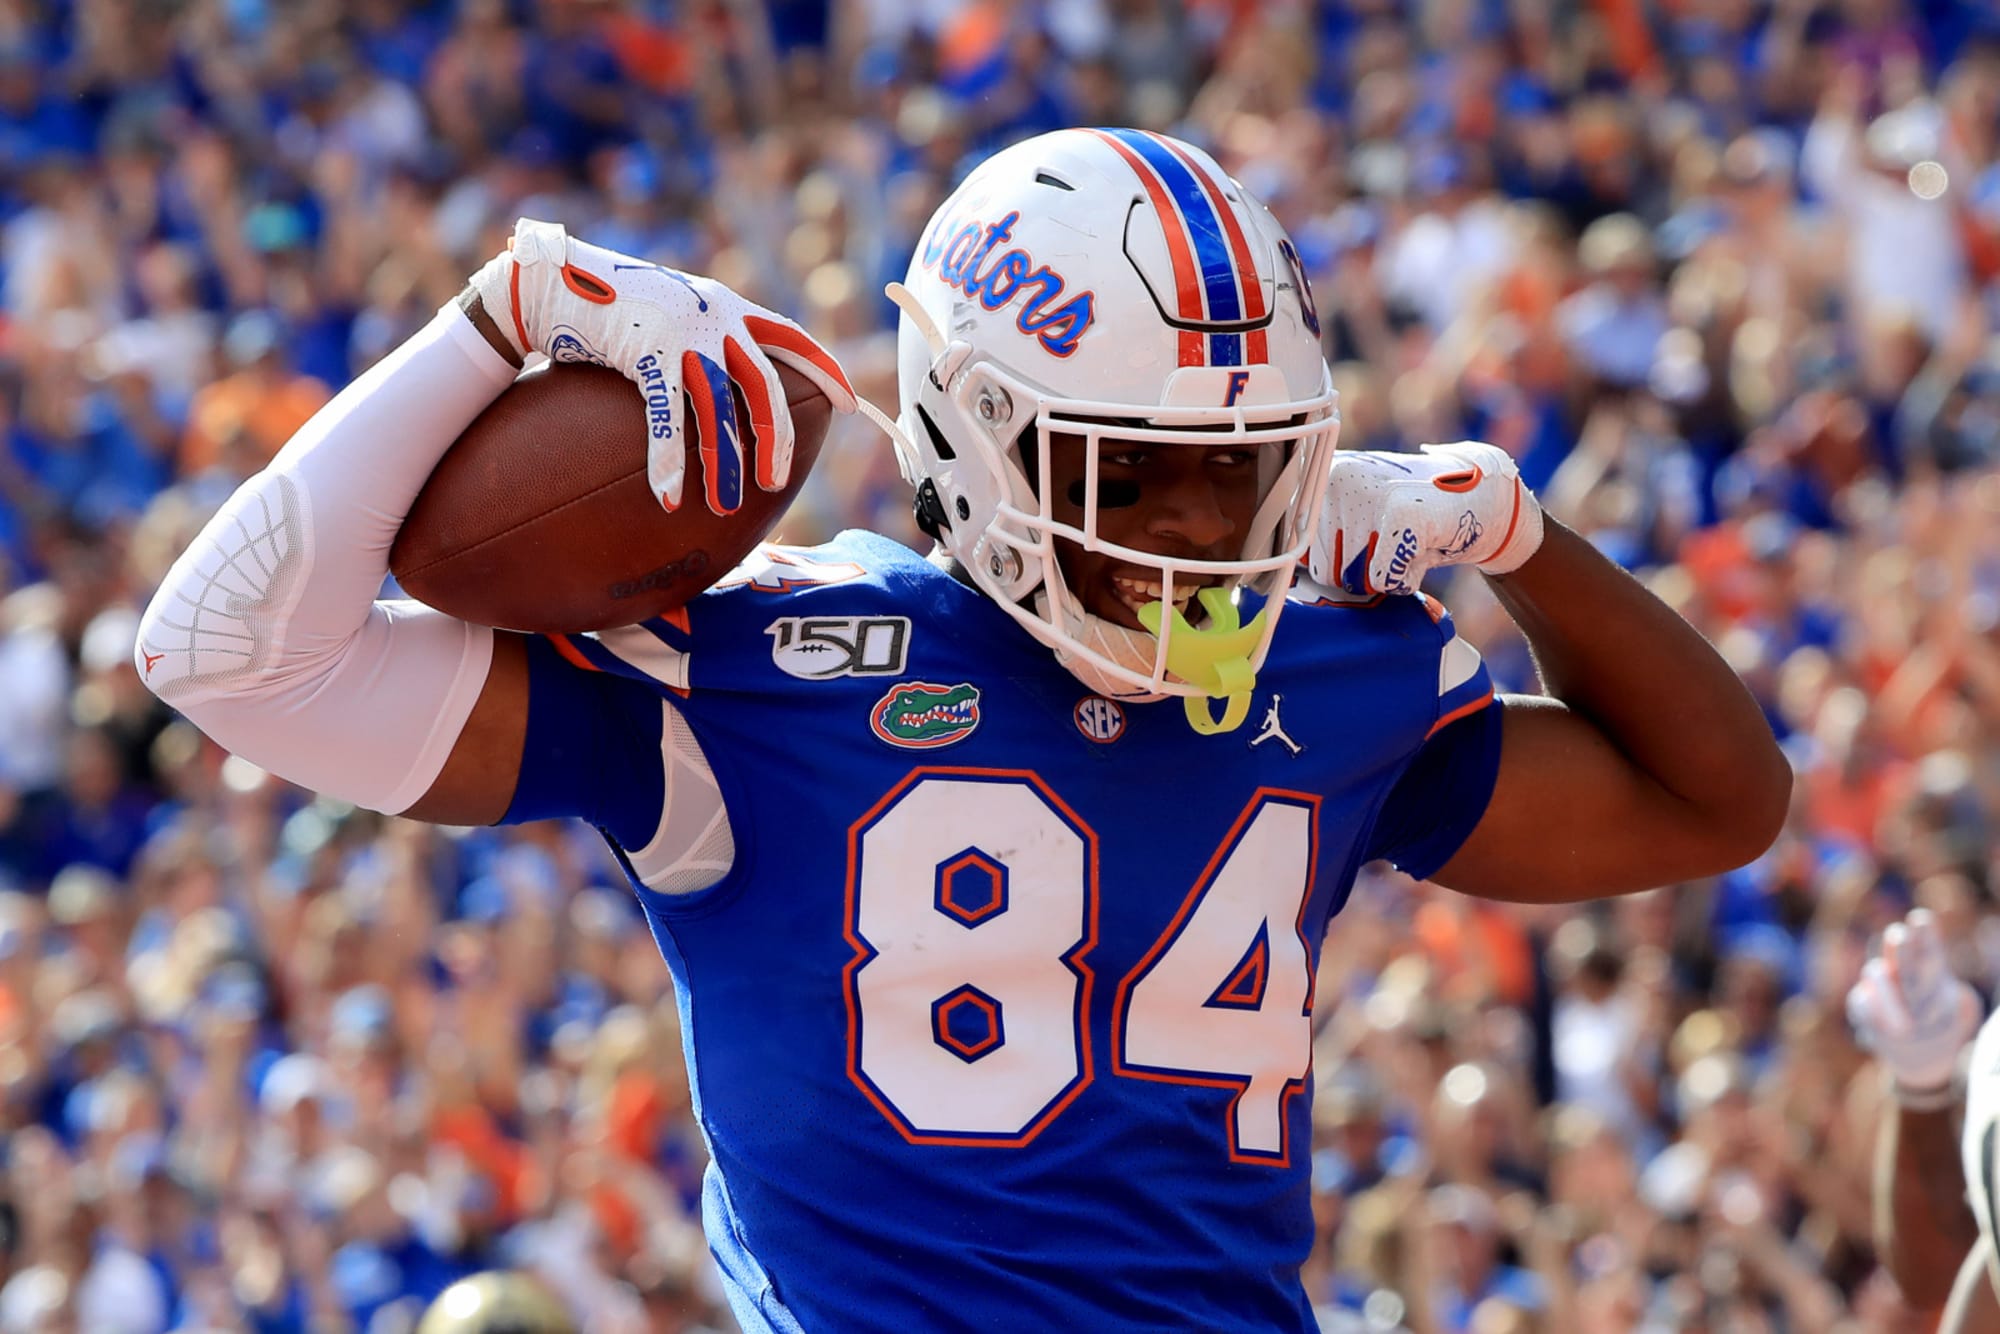 Florida Gators: Kyle Pitts is the No. 1 player in the 2021 NFL Draft